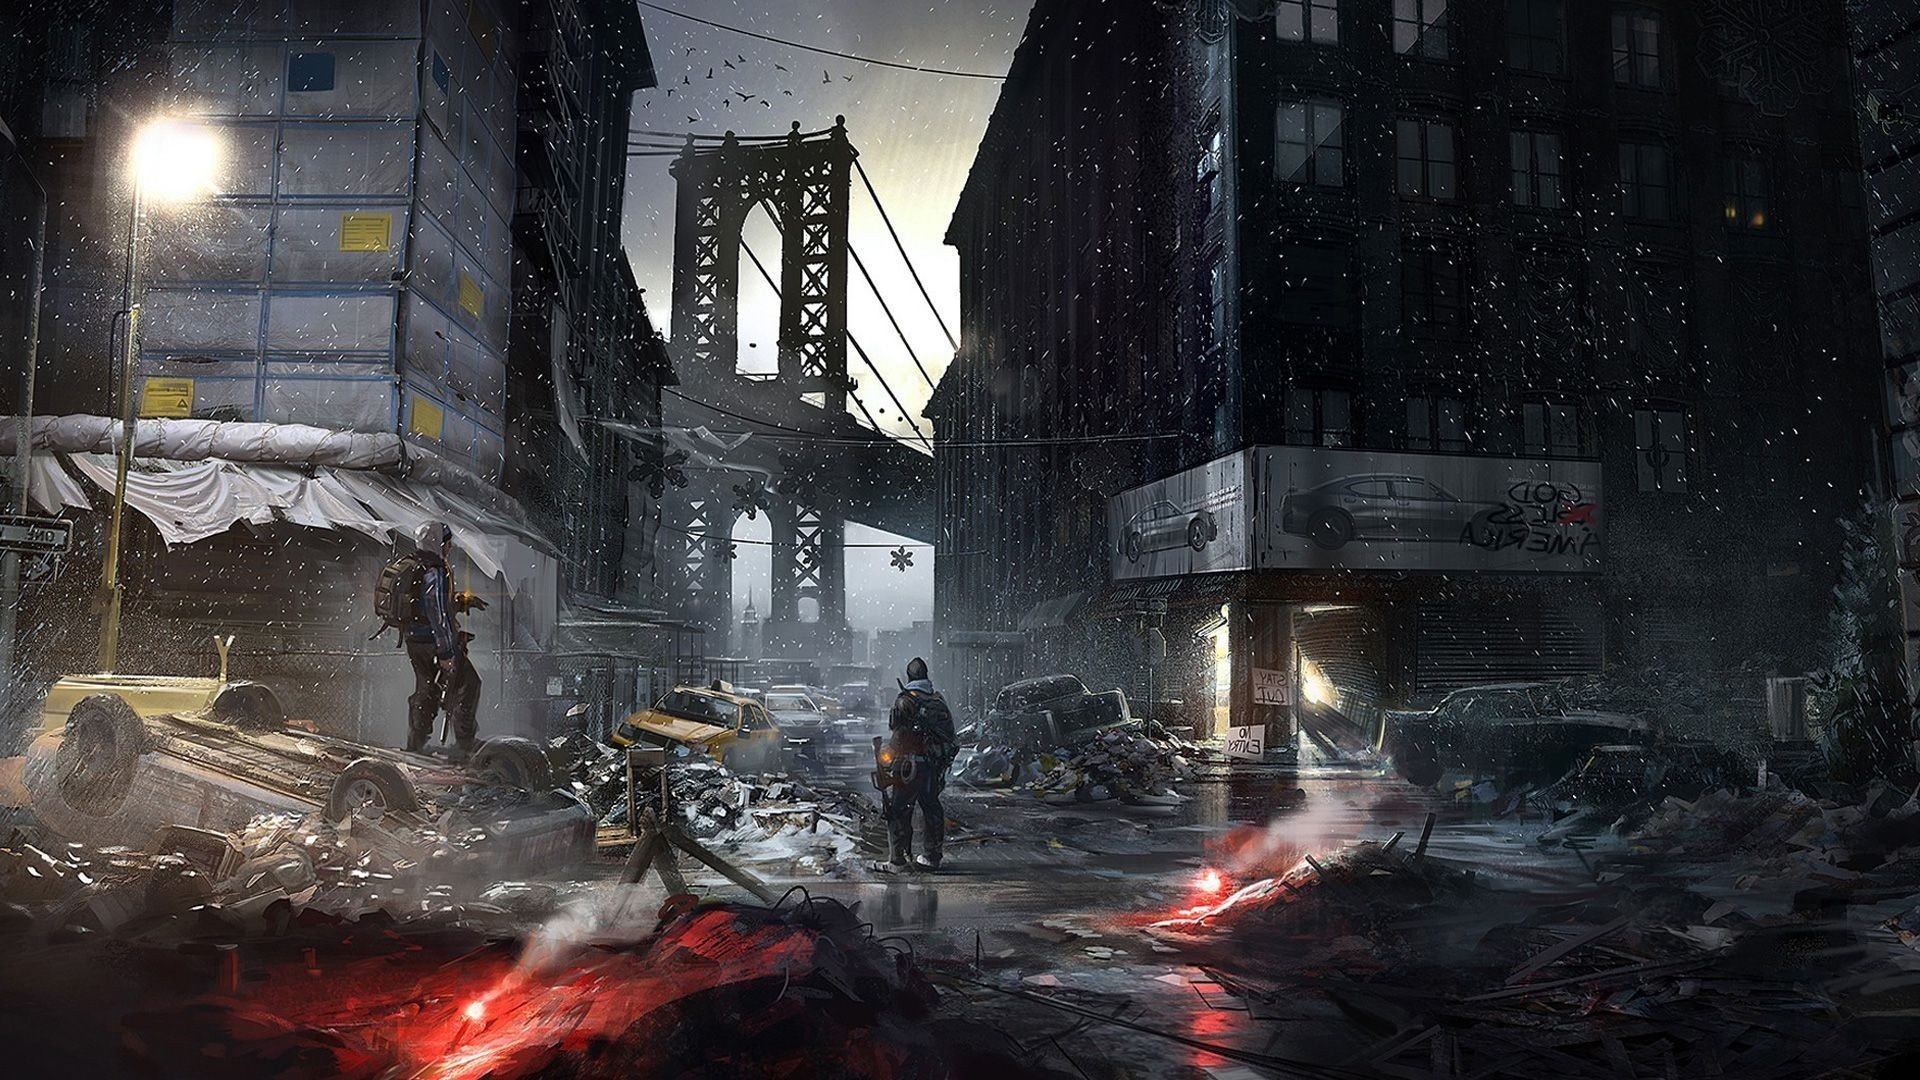 Tom Clancy&039;s The Division, Apocalyptic Wallpaper